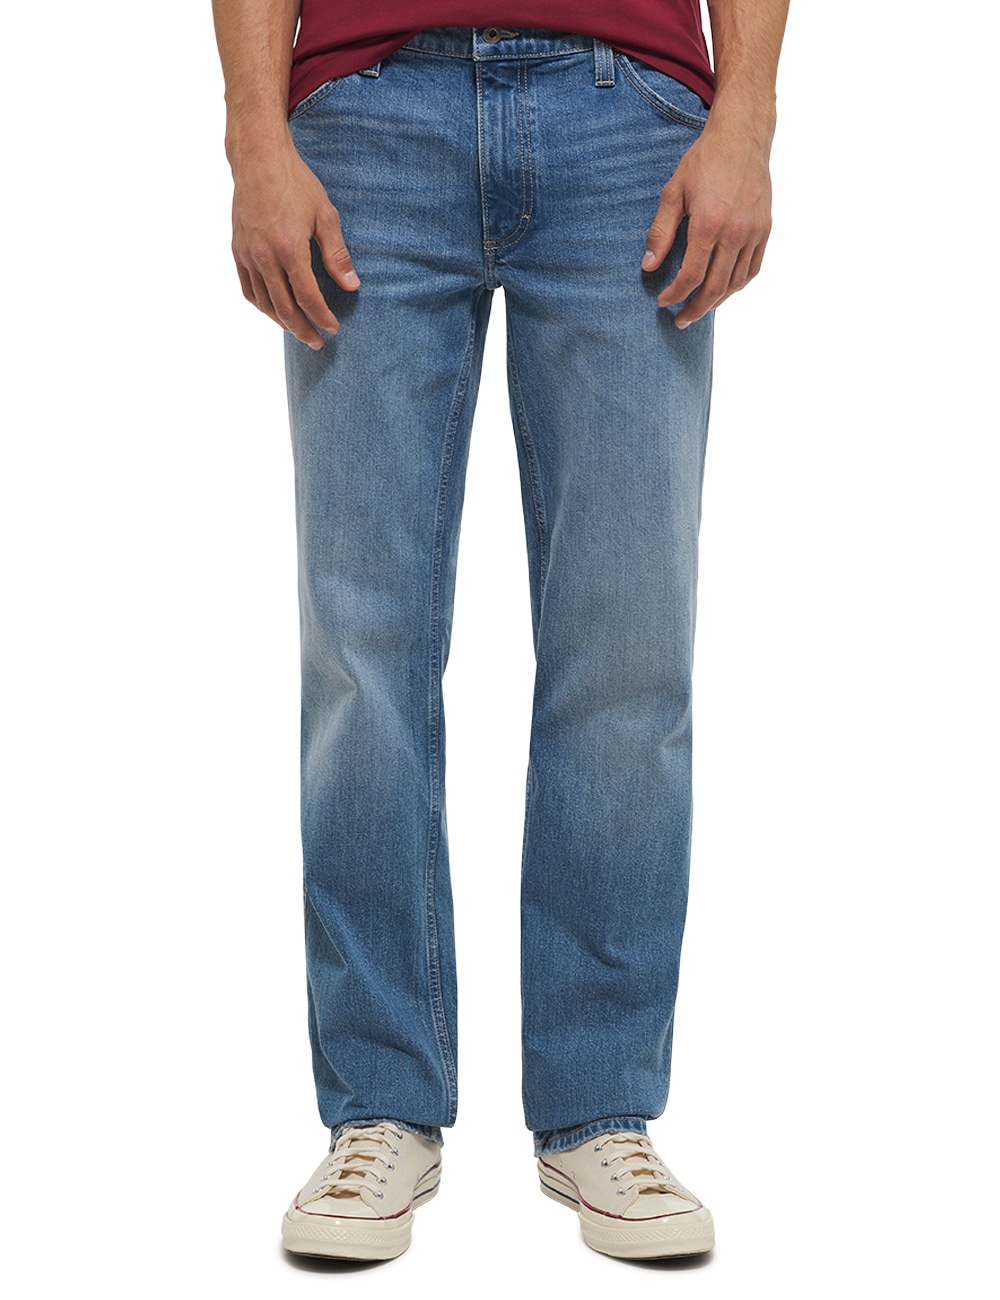 MUSTANG Bequeme Jeans "Style Tramper"